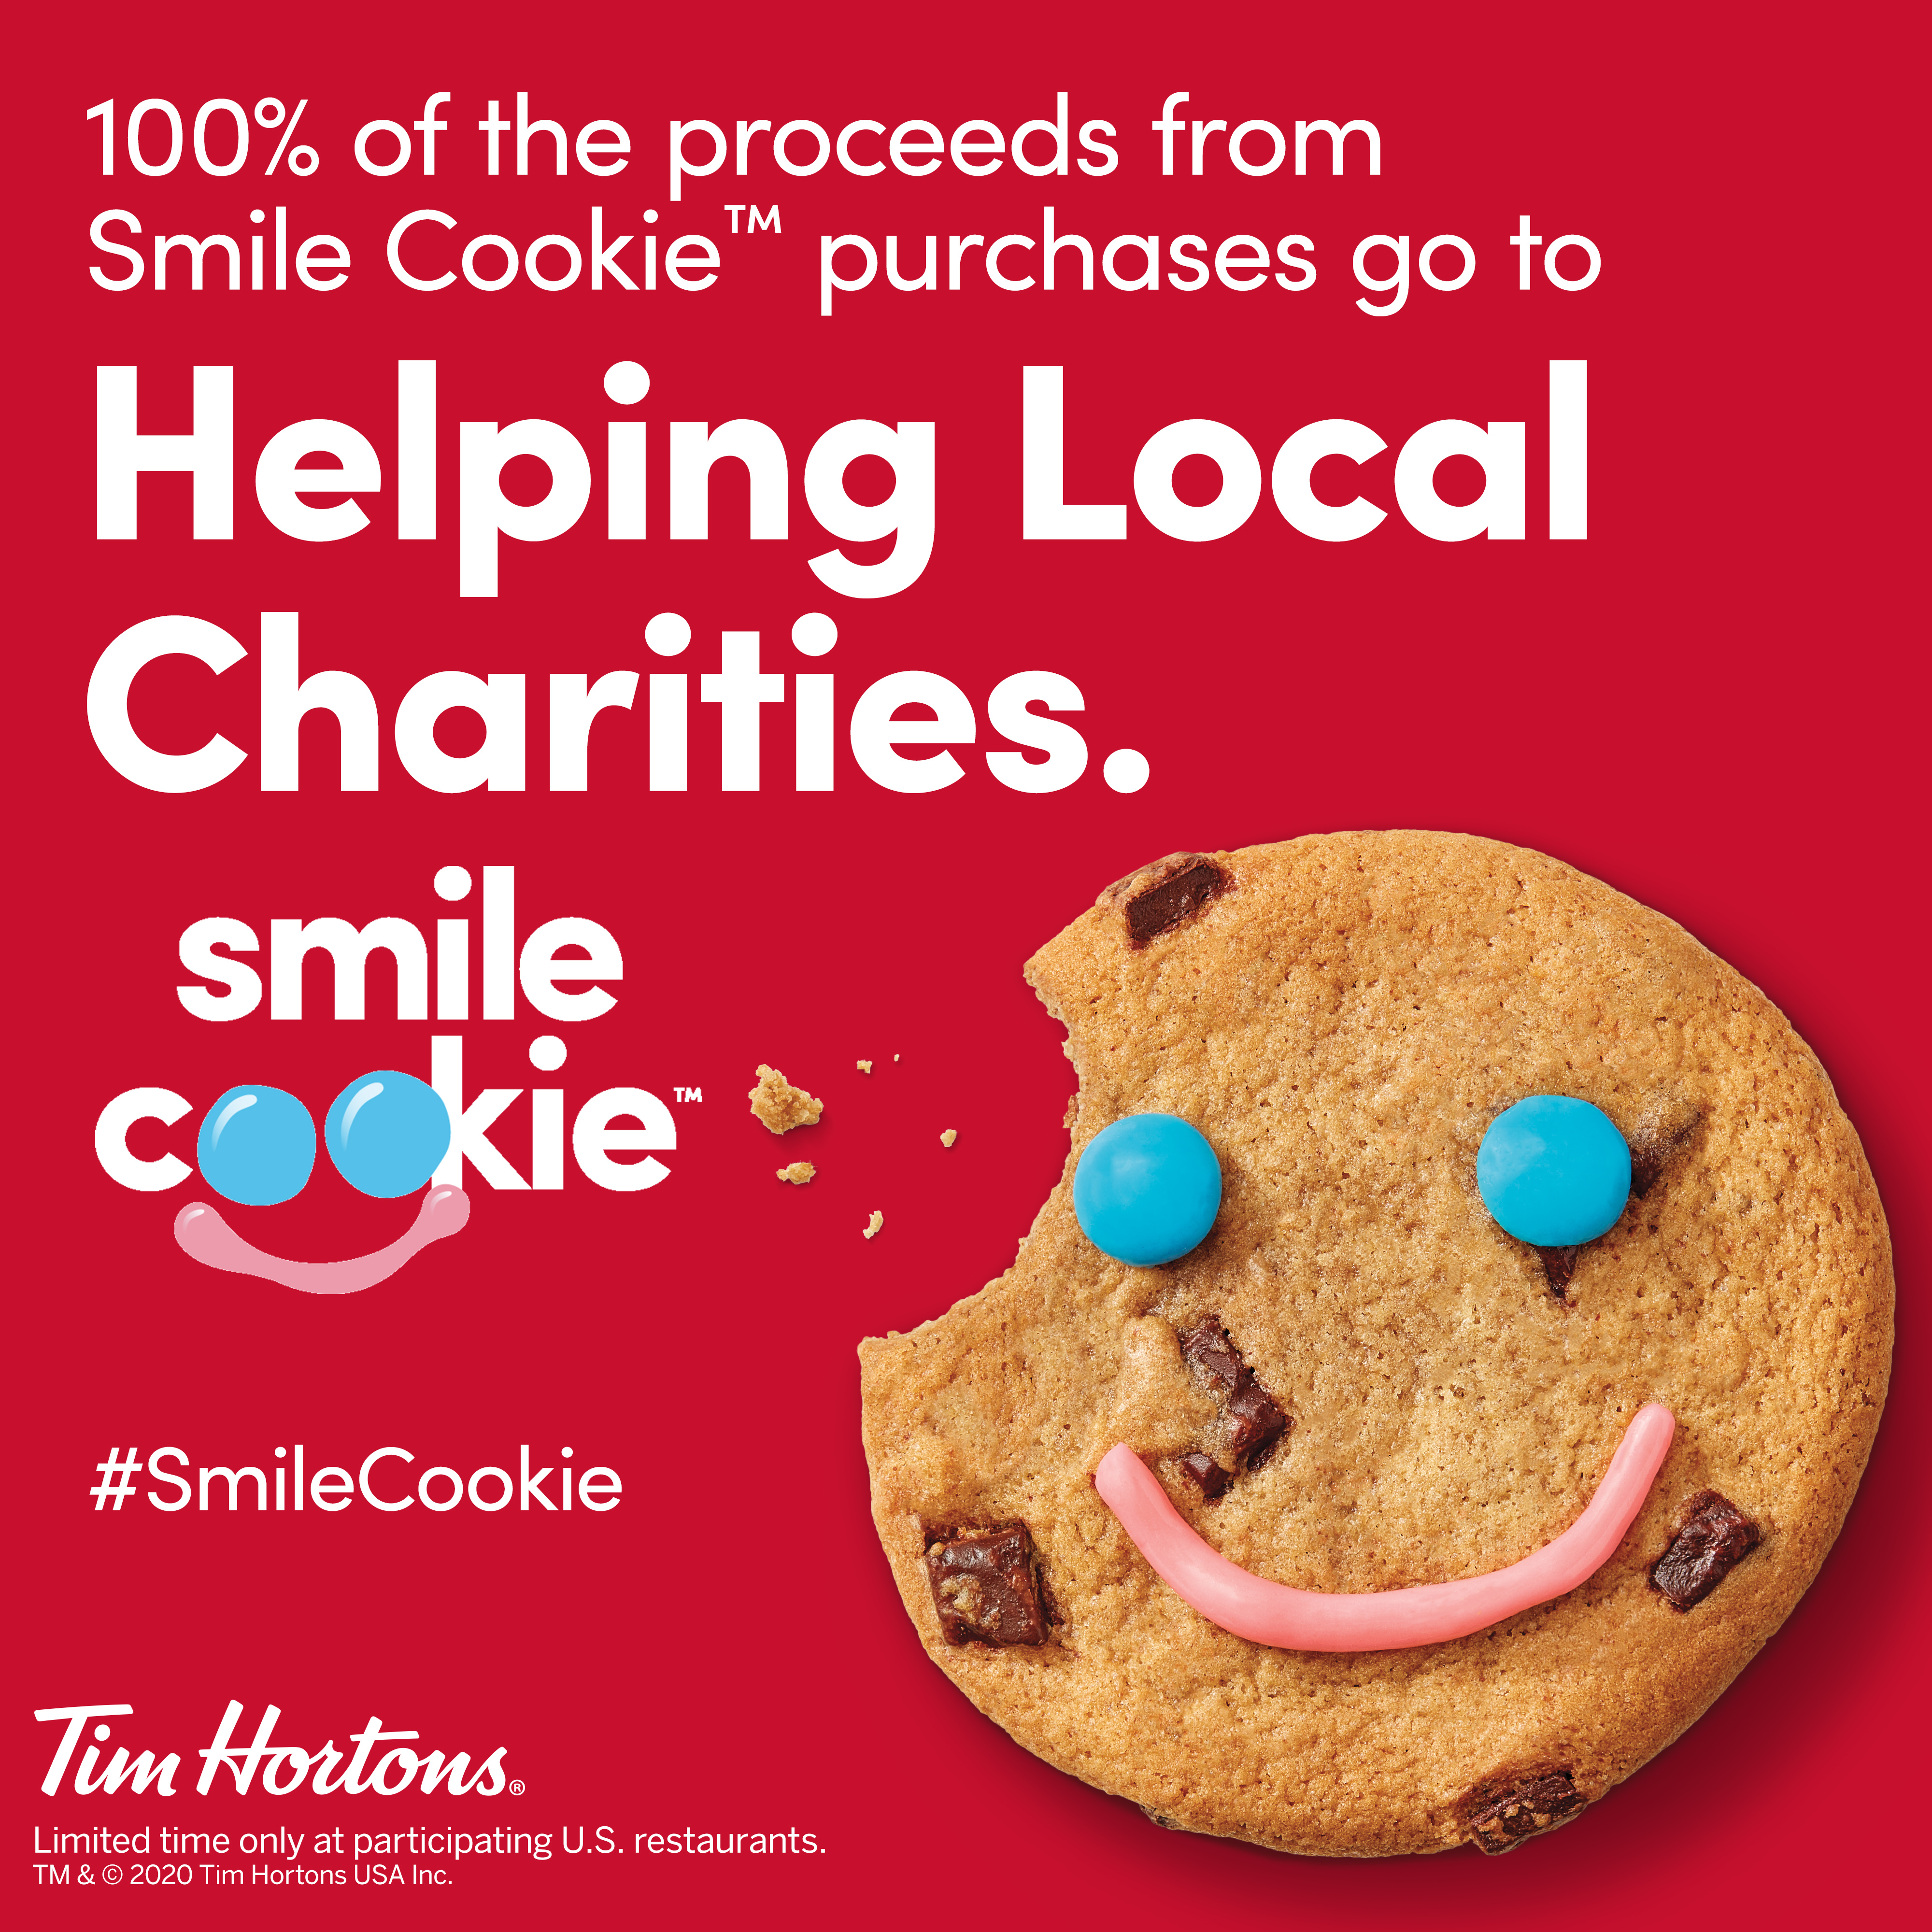 Hortons® Smile Cookie™ Campaign is - Supporting over Charities Across the U.S. | Wire